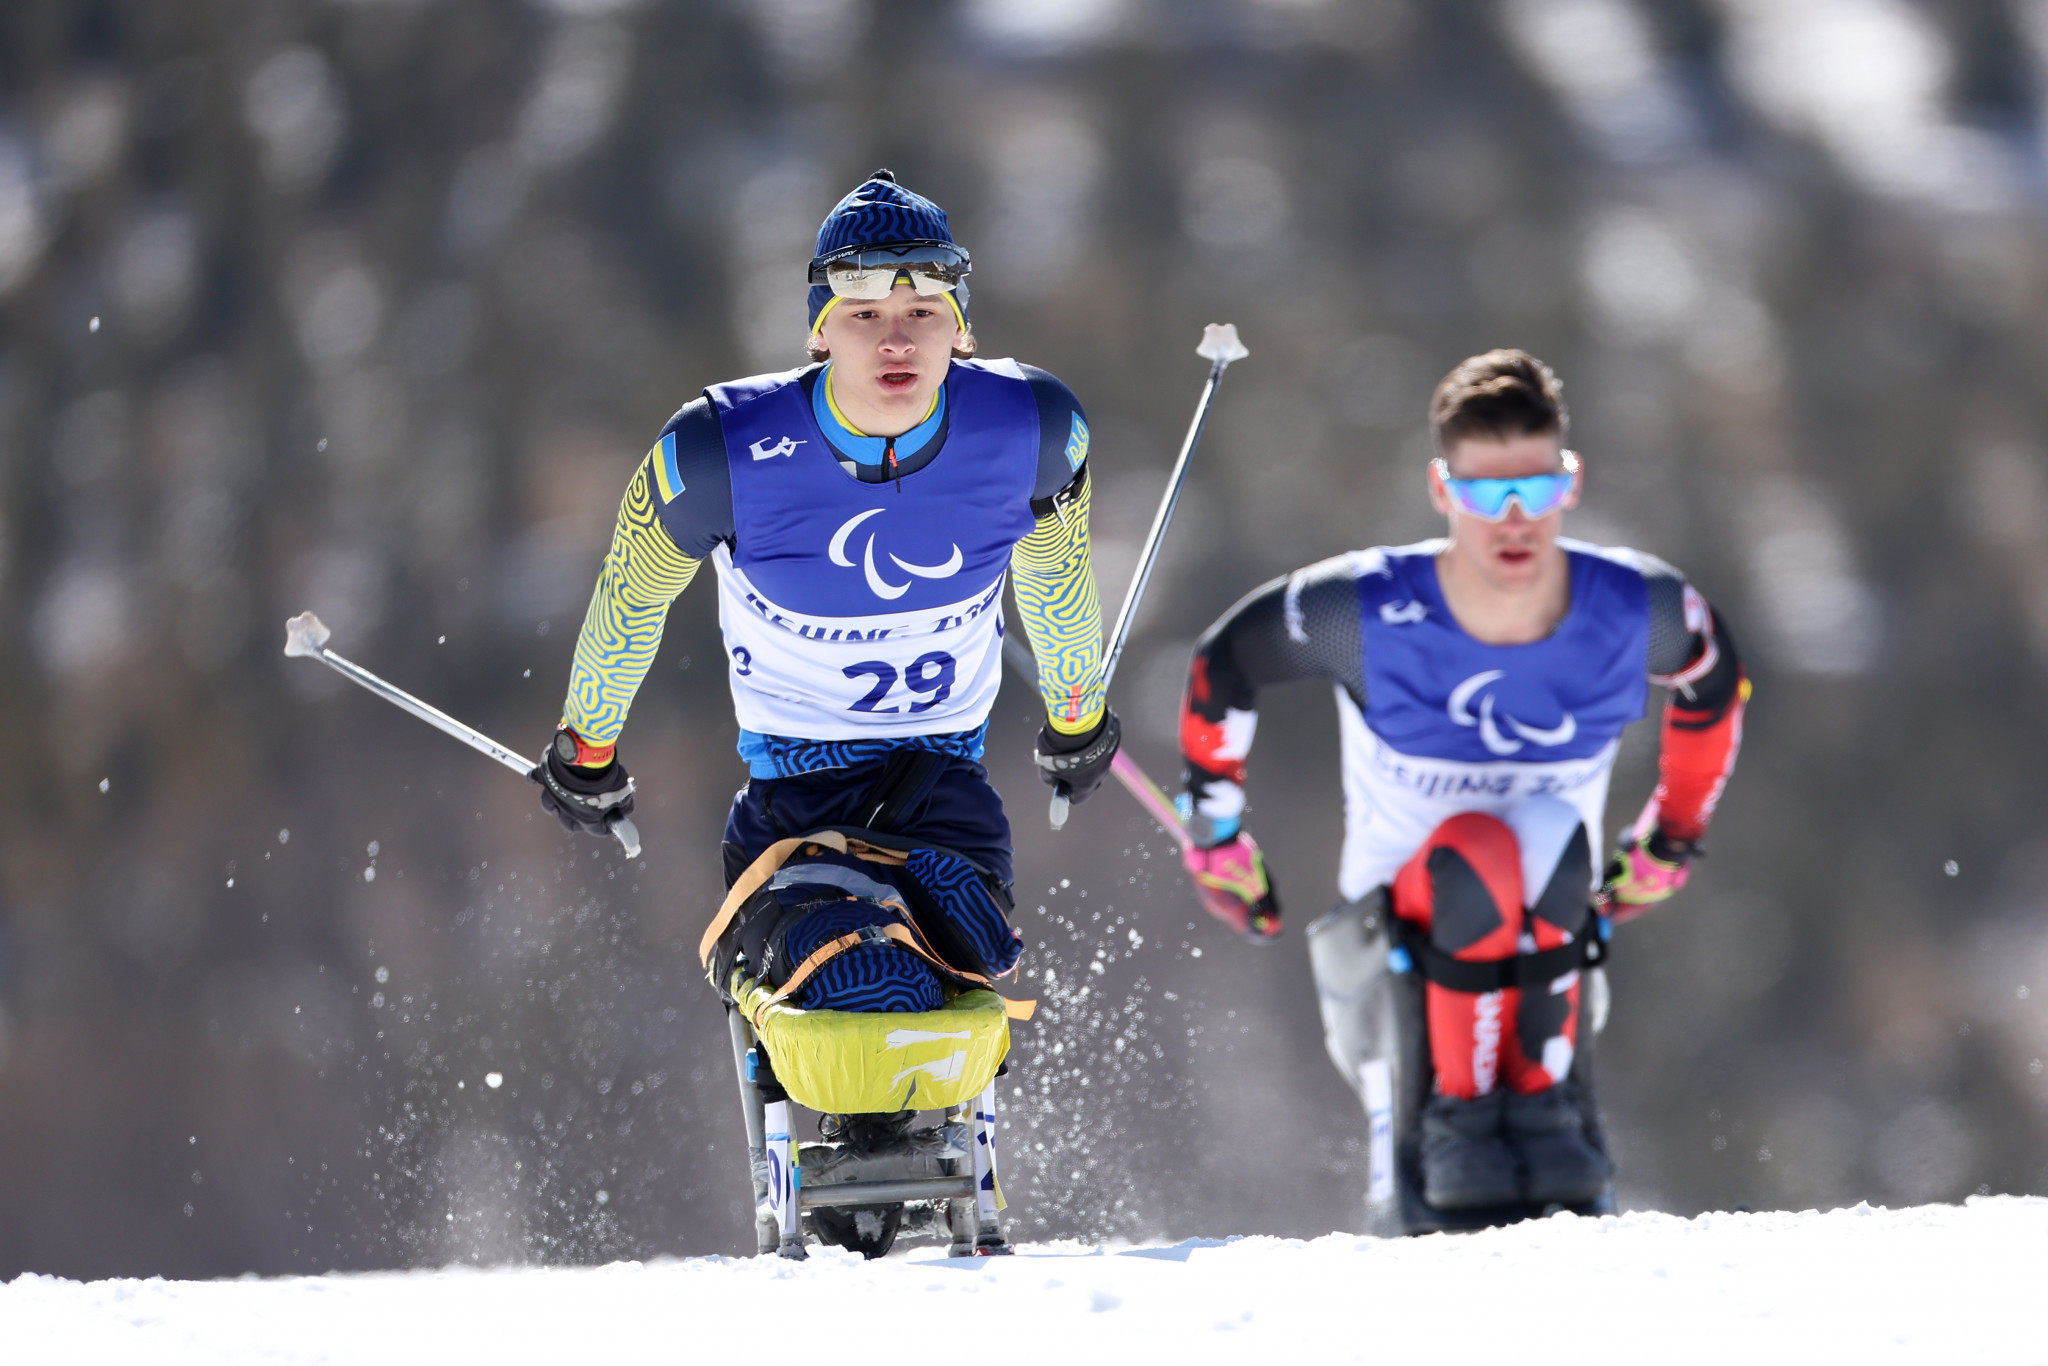 insidethegames is reporting LIVE on the Beijing 2022 Winter Paralympics